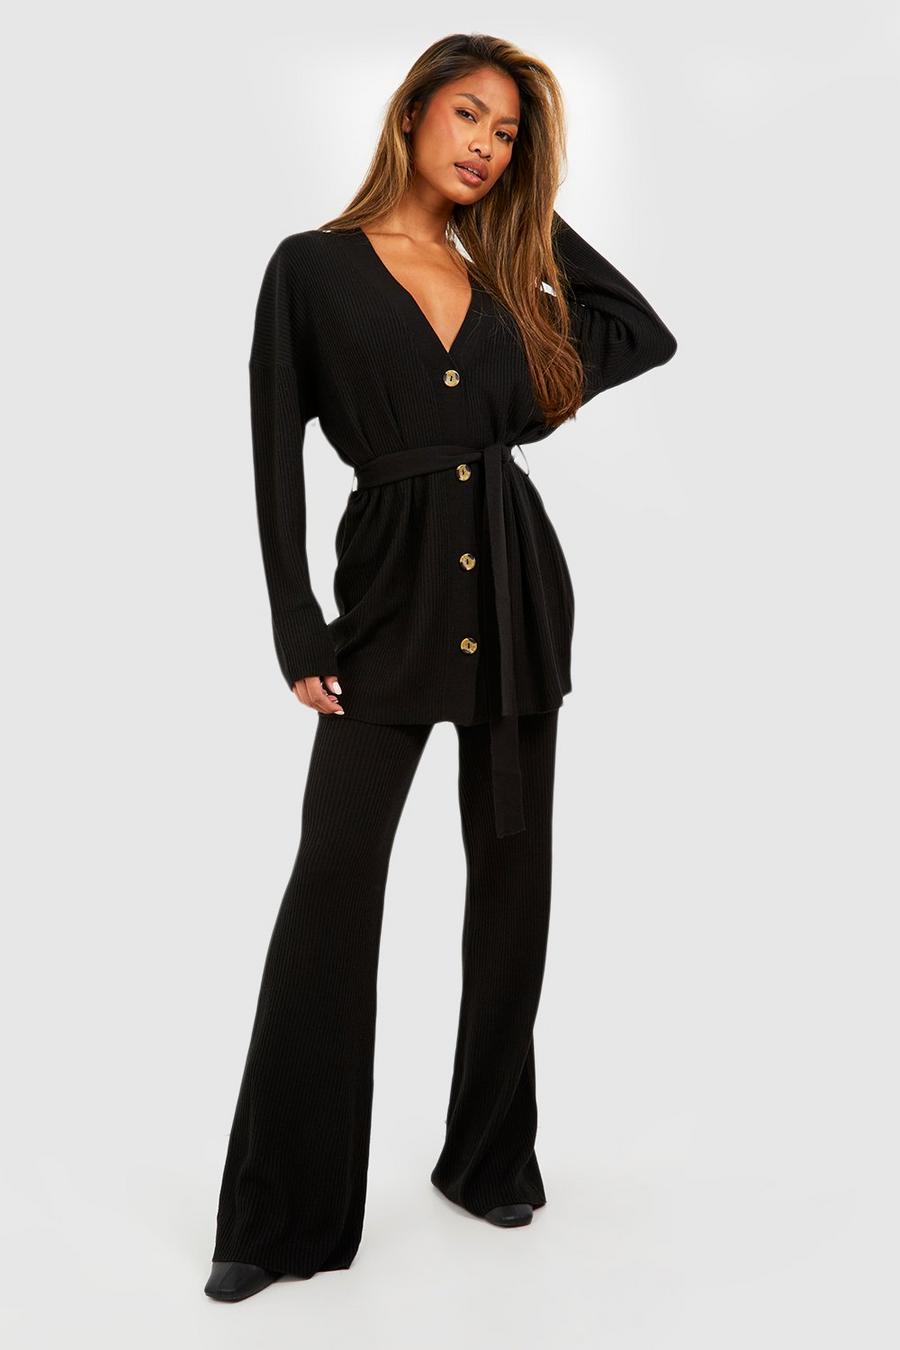 Black Knitted Cardigan & Wide Leg Trouser Co-ord